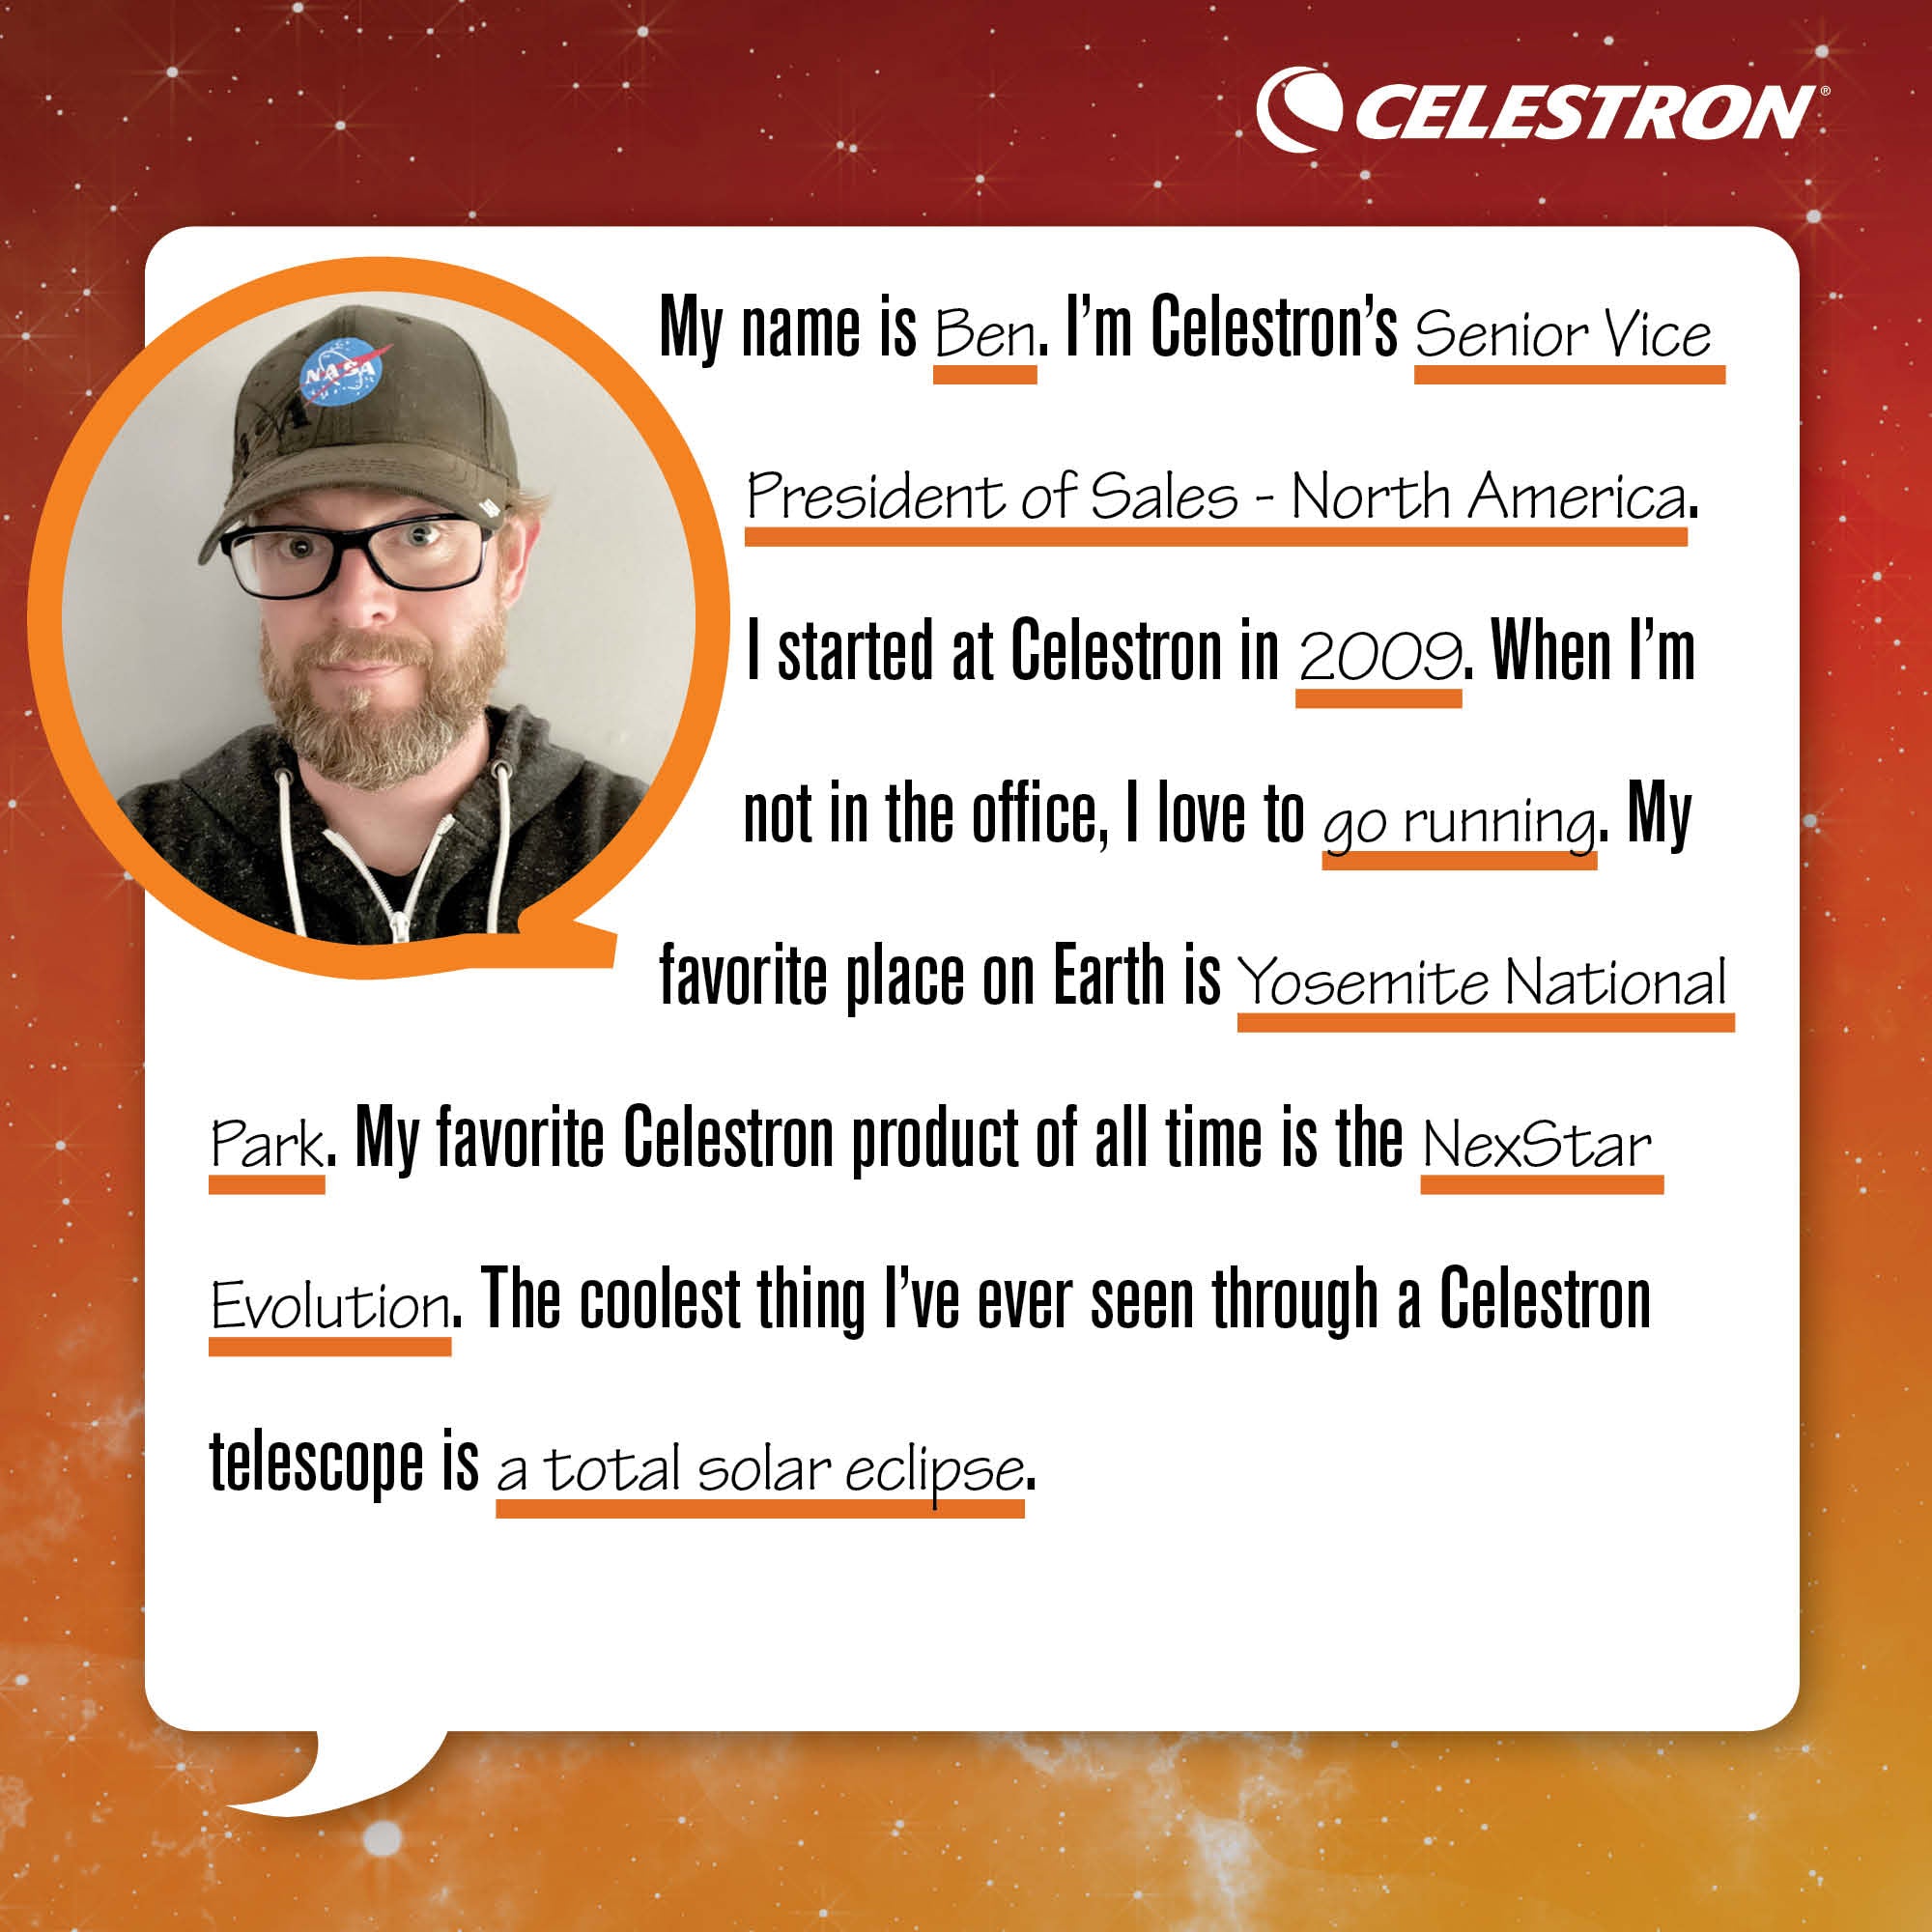 My name is Ben. I'm Celestron's Senior VP of Sales - North America. I started at Celestron in 2009. When I'm not in the office, I love to go running.  My favorite place on Earth is Yosemite National Park. My favorite Celestron product of all time is the NexStar Evolution. The coolest thing I've ever seen through a Celestron telescope is a Total Solar Eclipse.